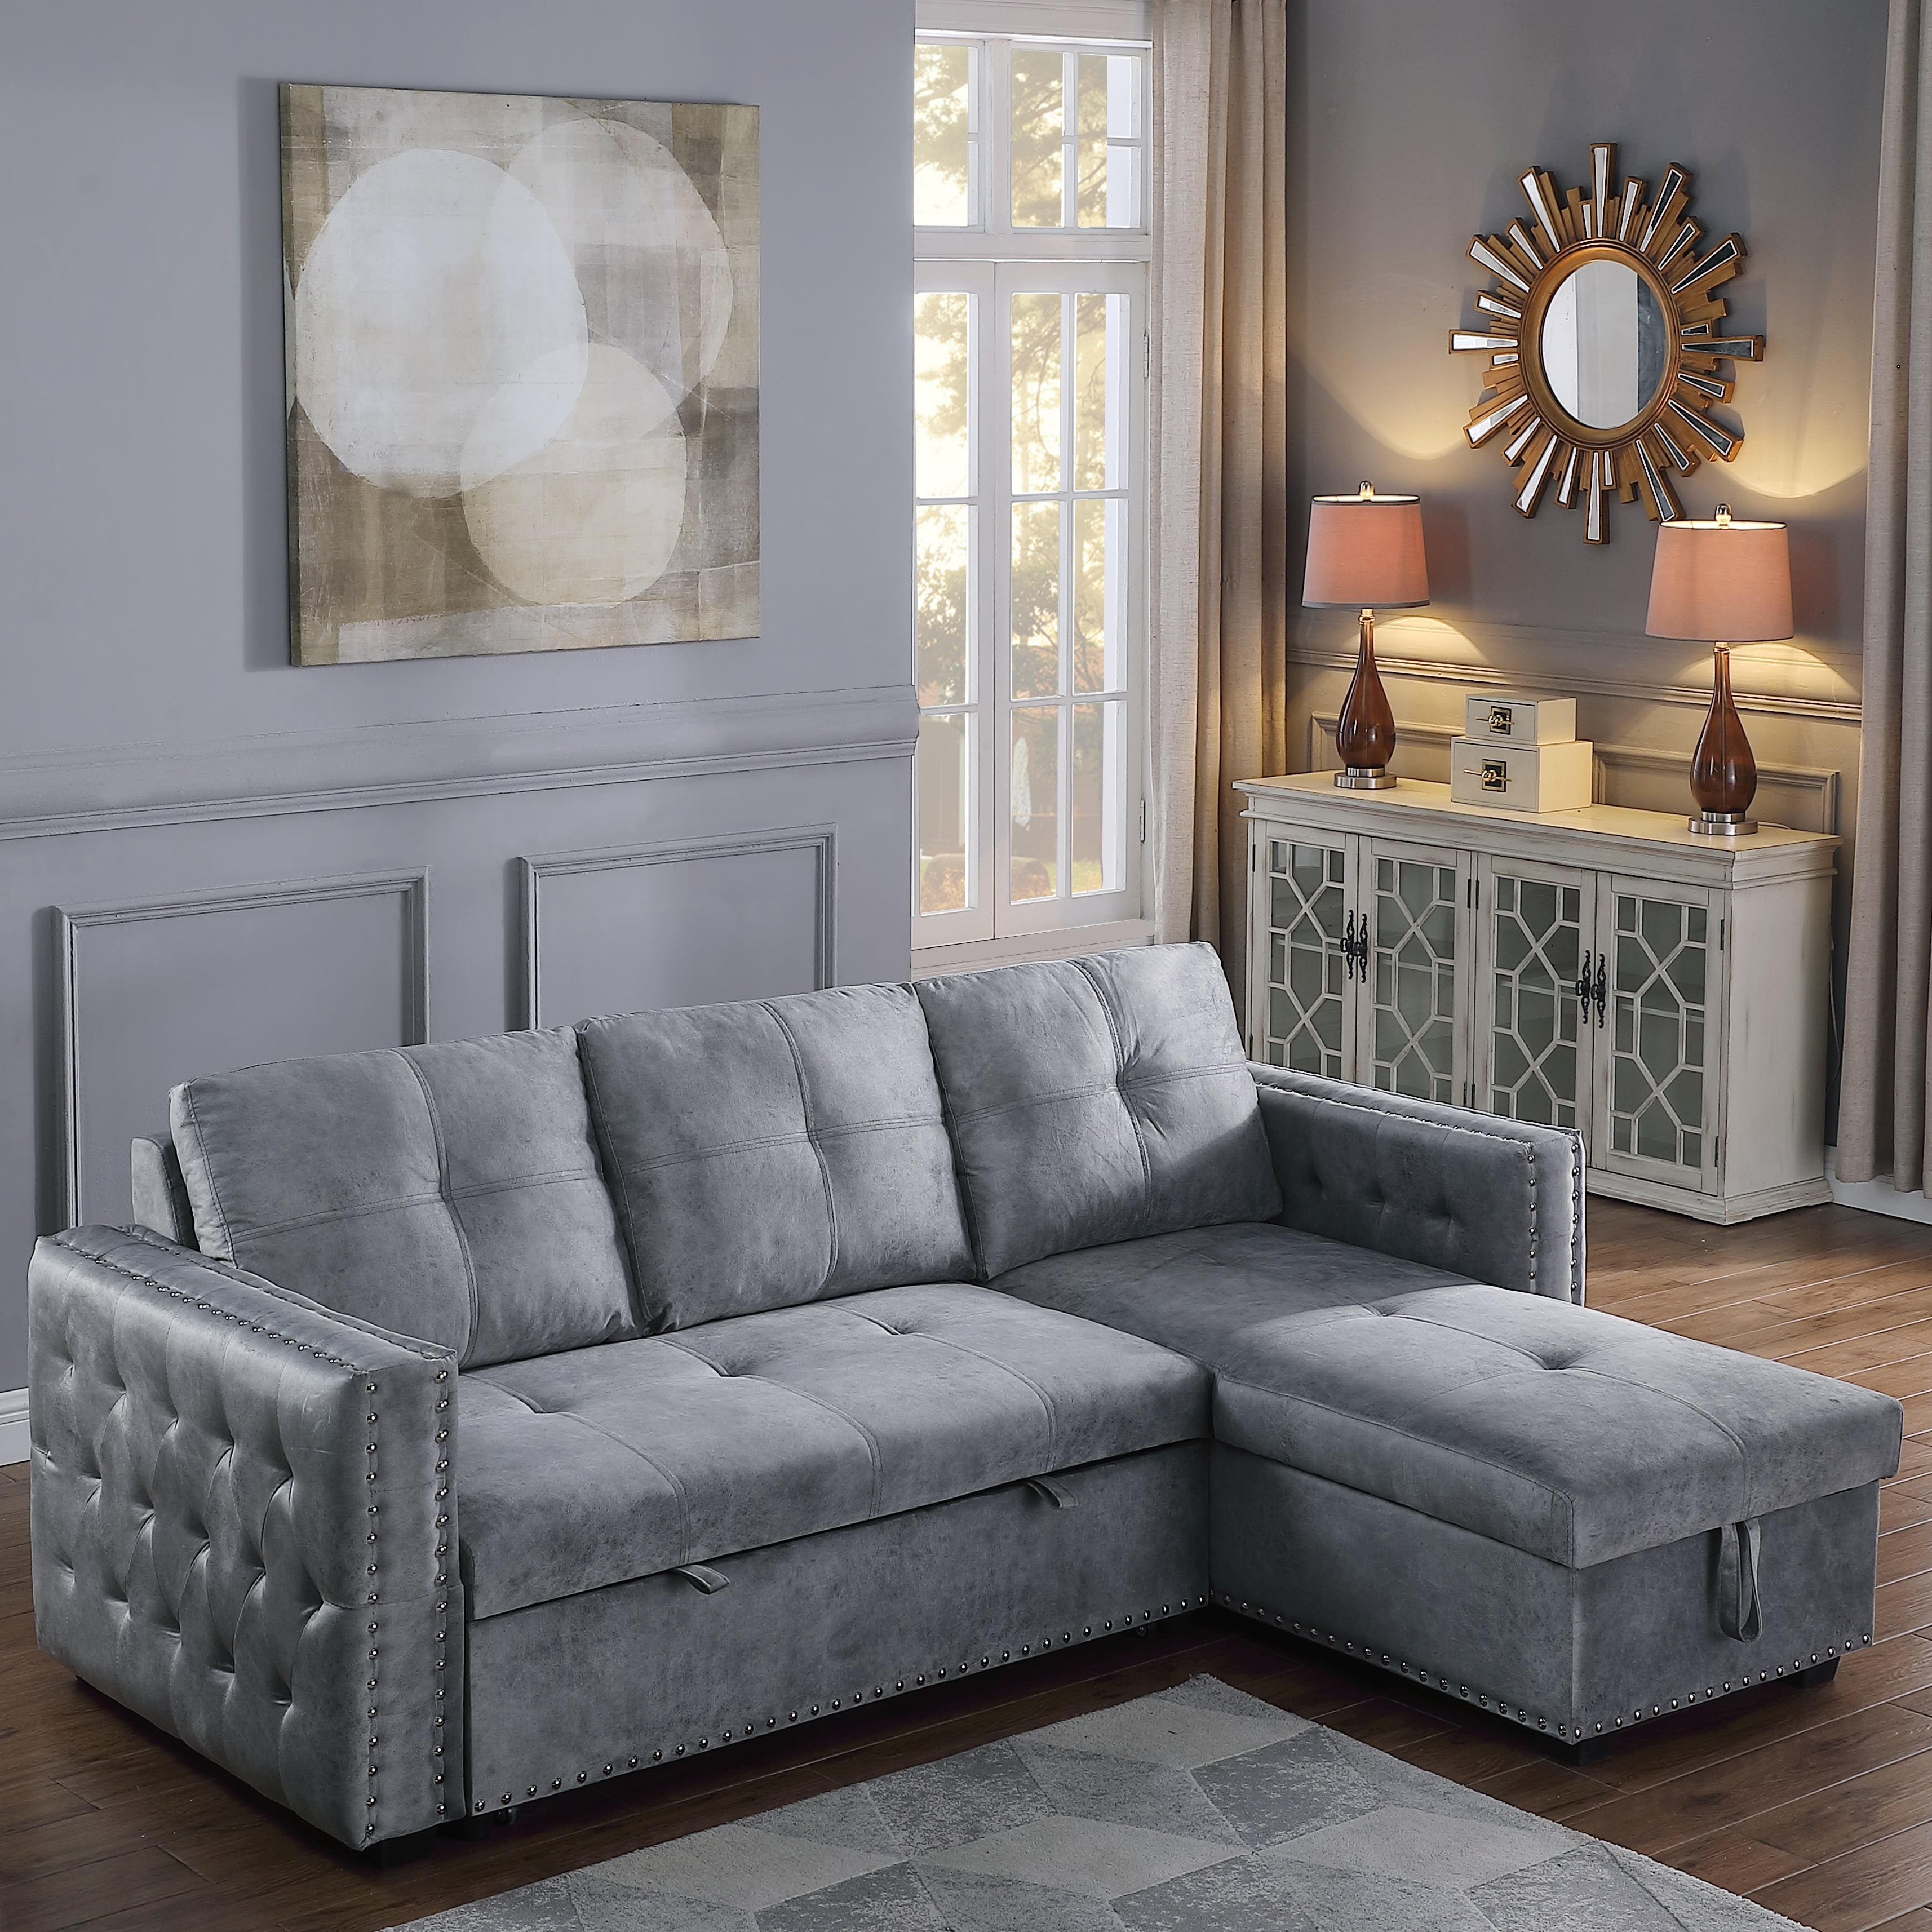 Morden Fort Sectional Sleeper Sofa With